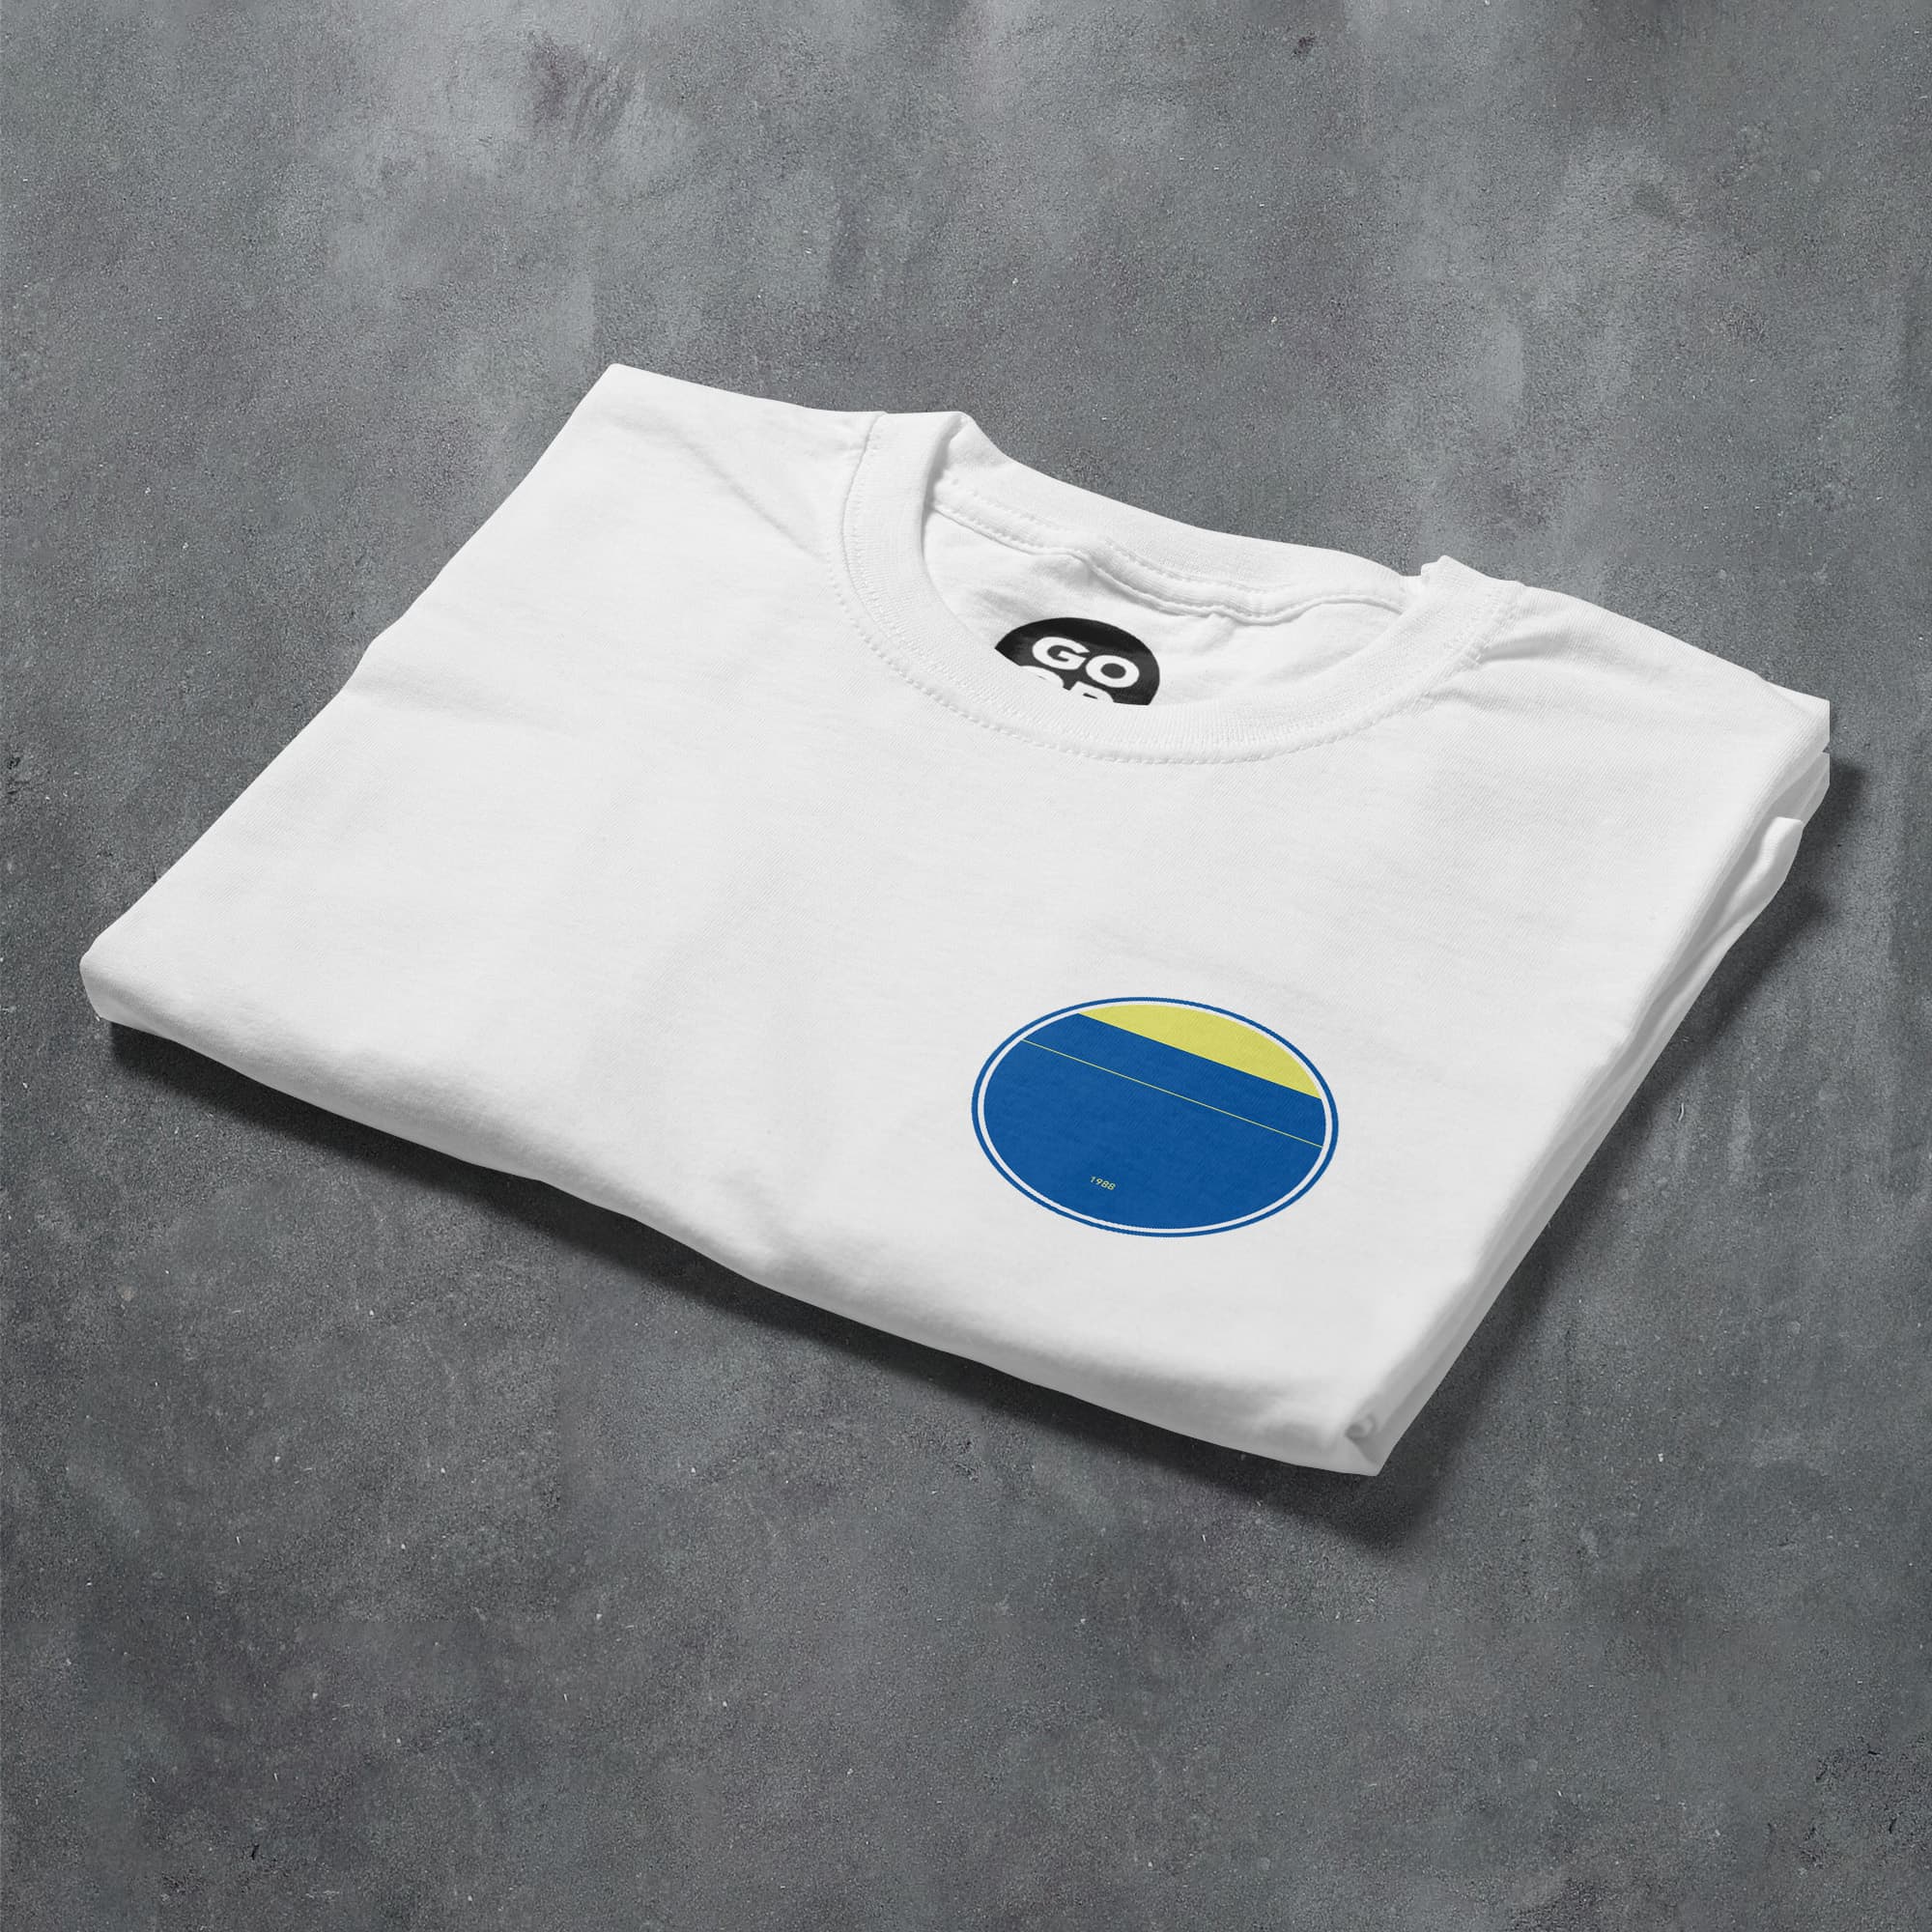 a white t - shirt with a blue and yellow circle on it